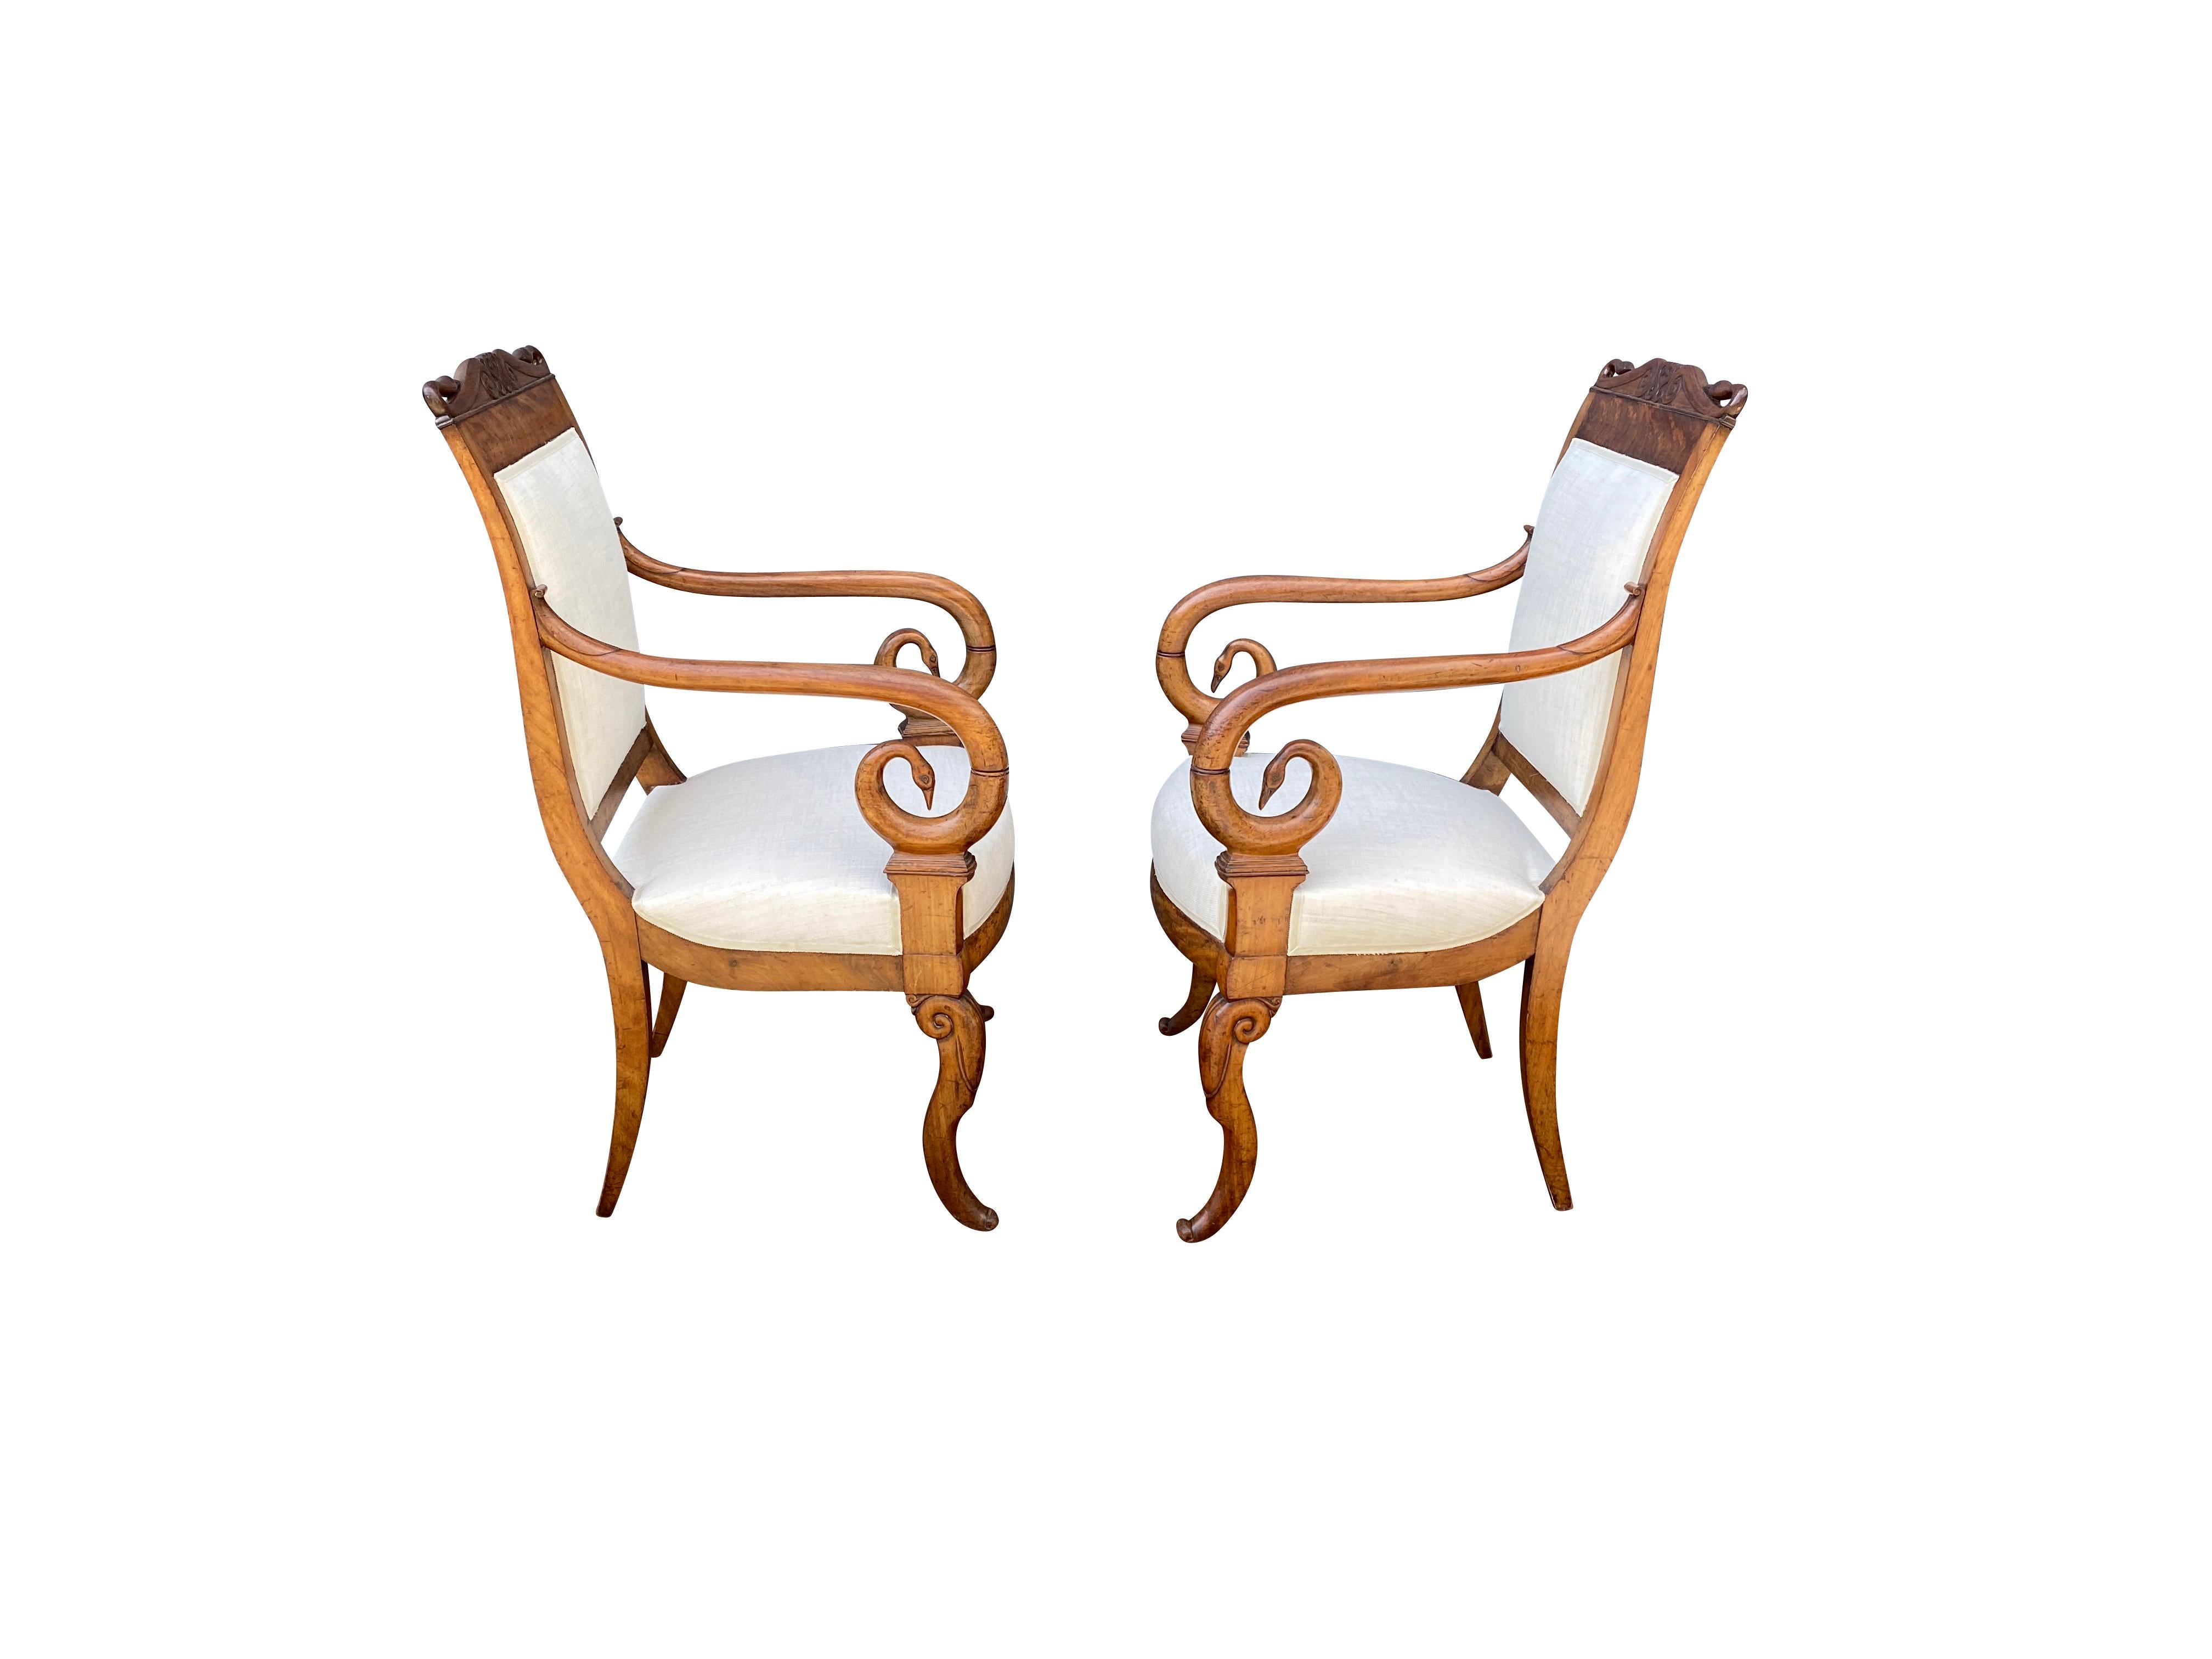 Pair of Swedish Empire Mahogany Armchairs In Good Condition For Sale In Essex, MA